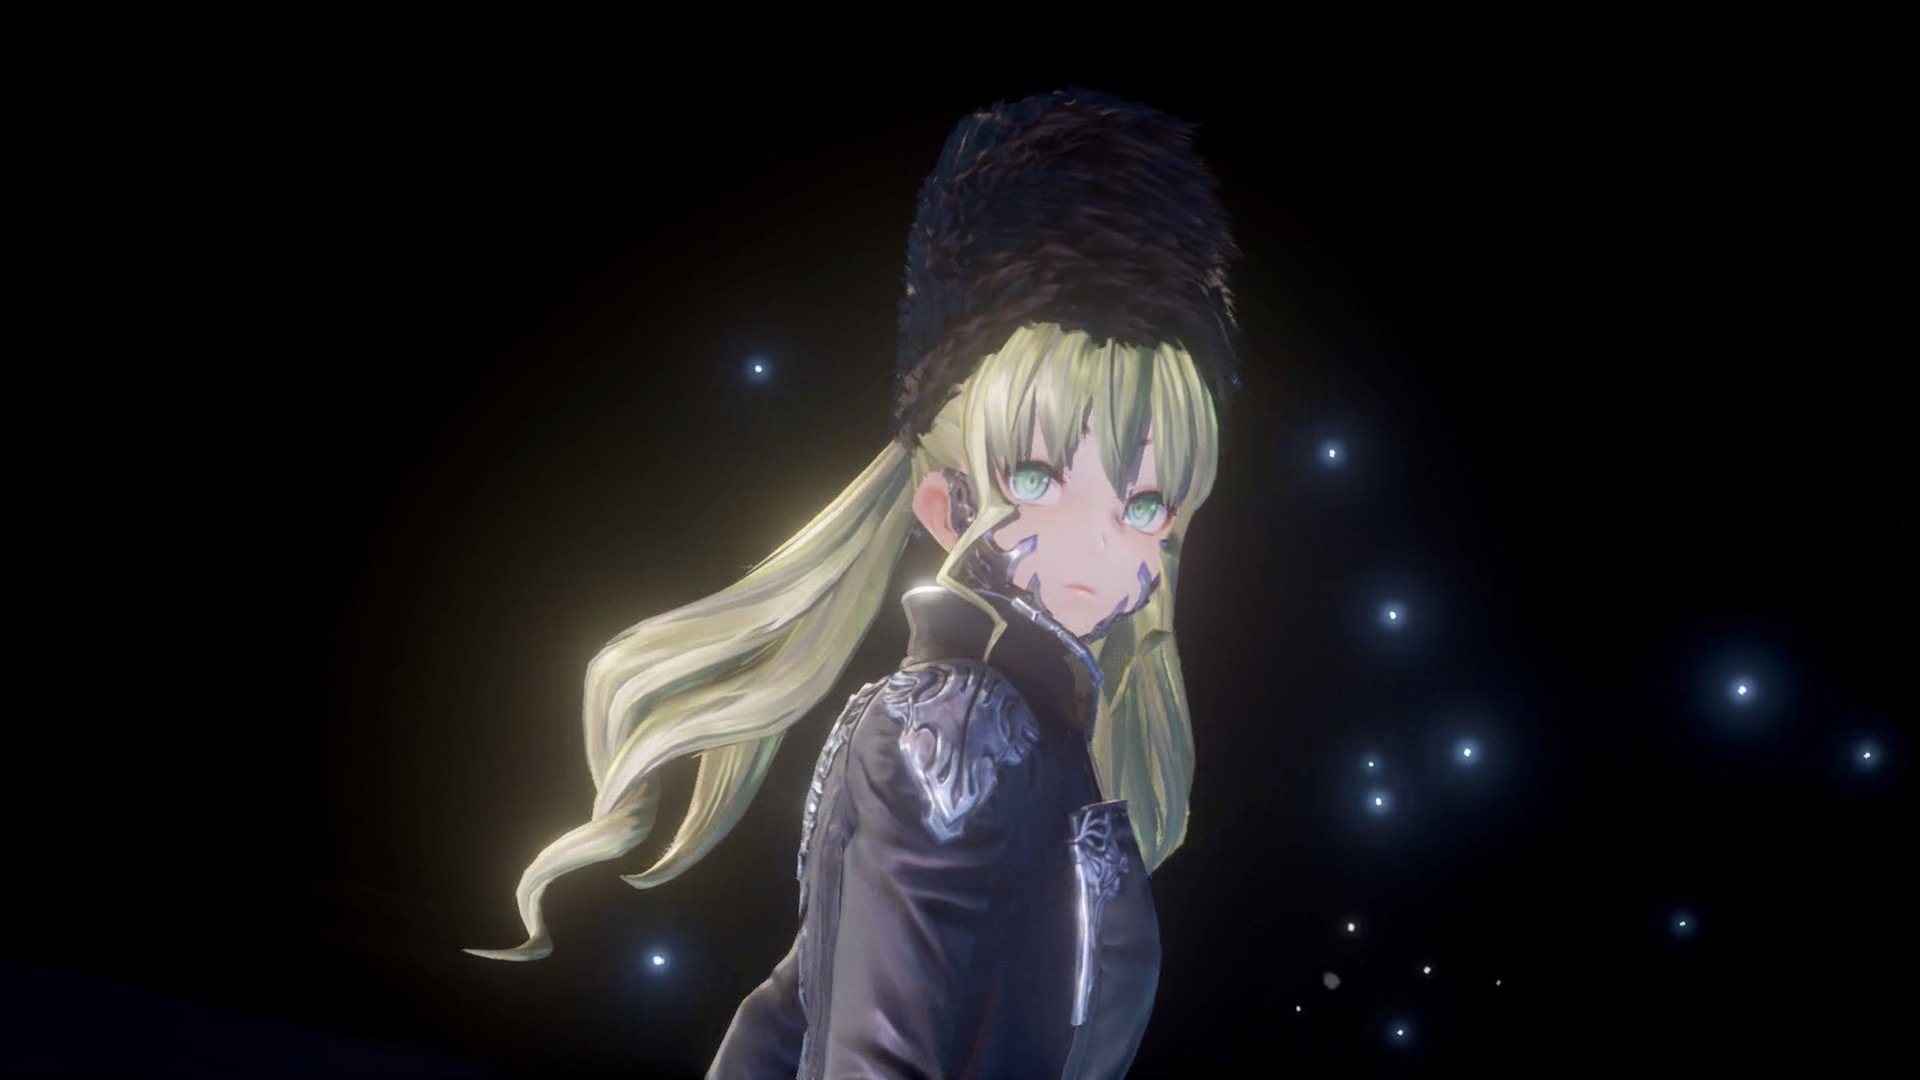 Code Vein is anime vampire Dark Souls, and that's probably fine